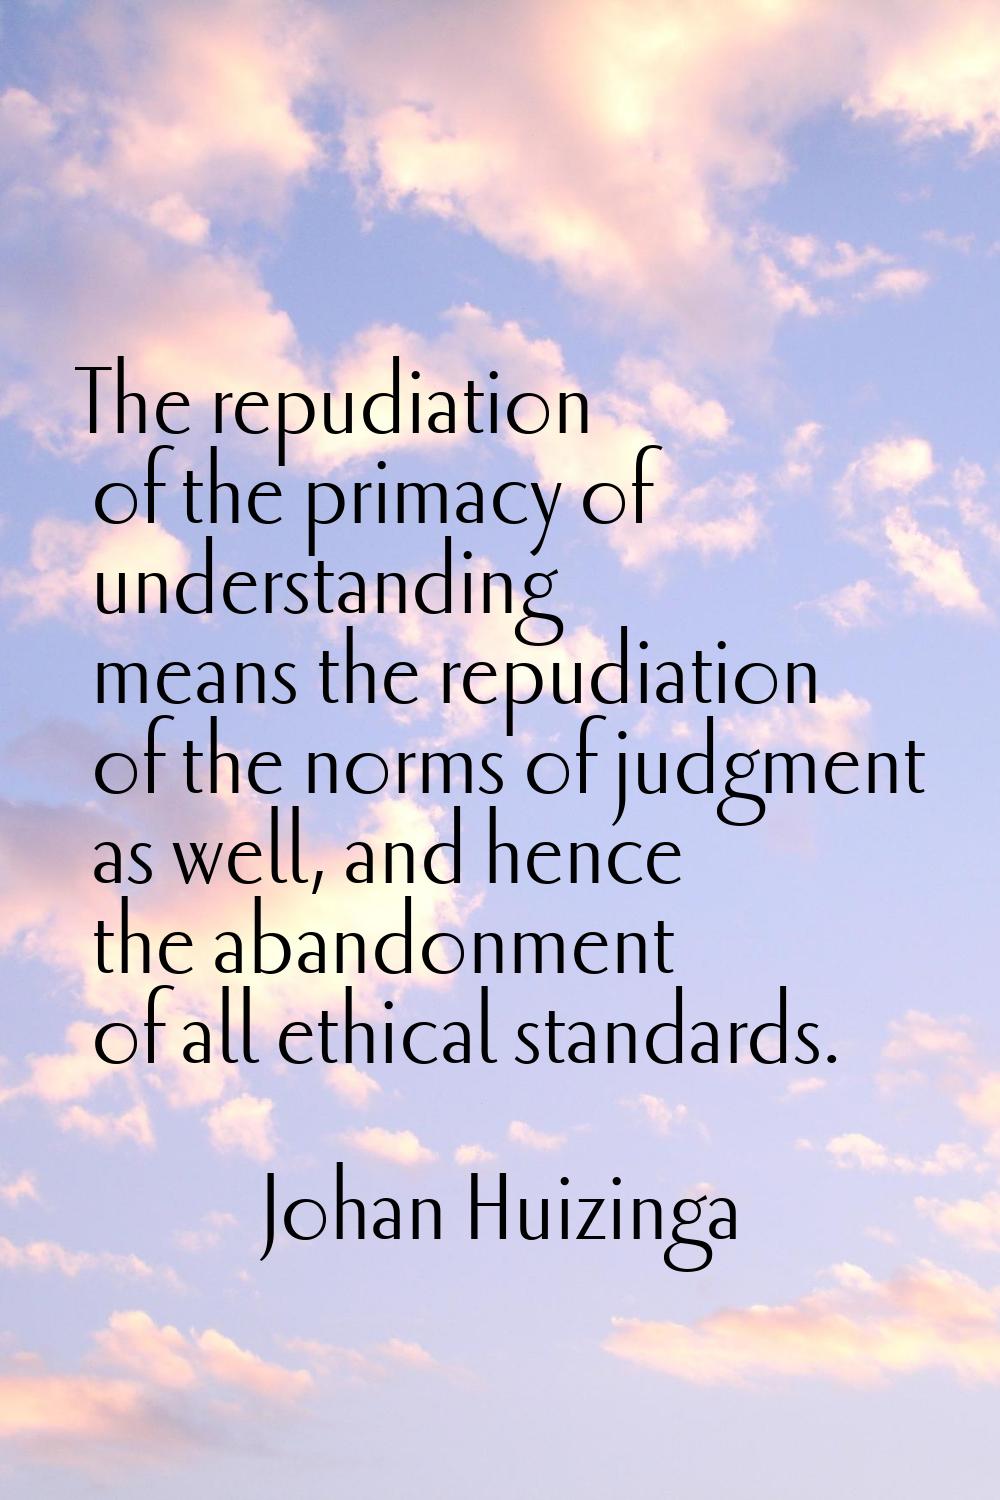 The repudiation of the primacy of understanding means the repudiation of the norms of judgment as w